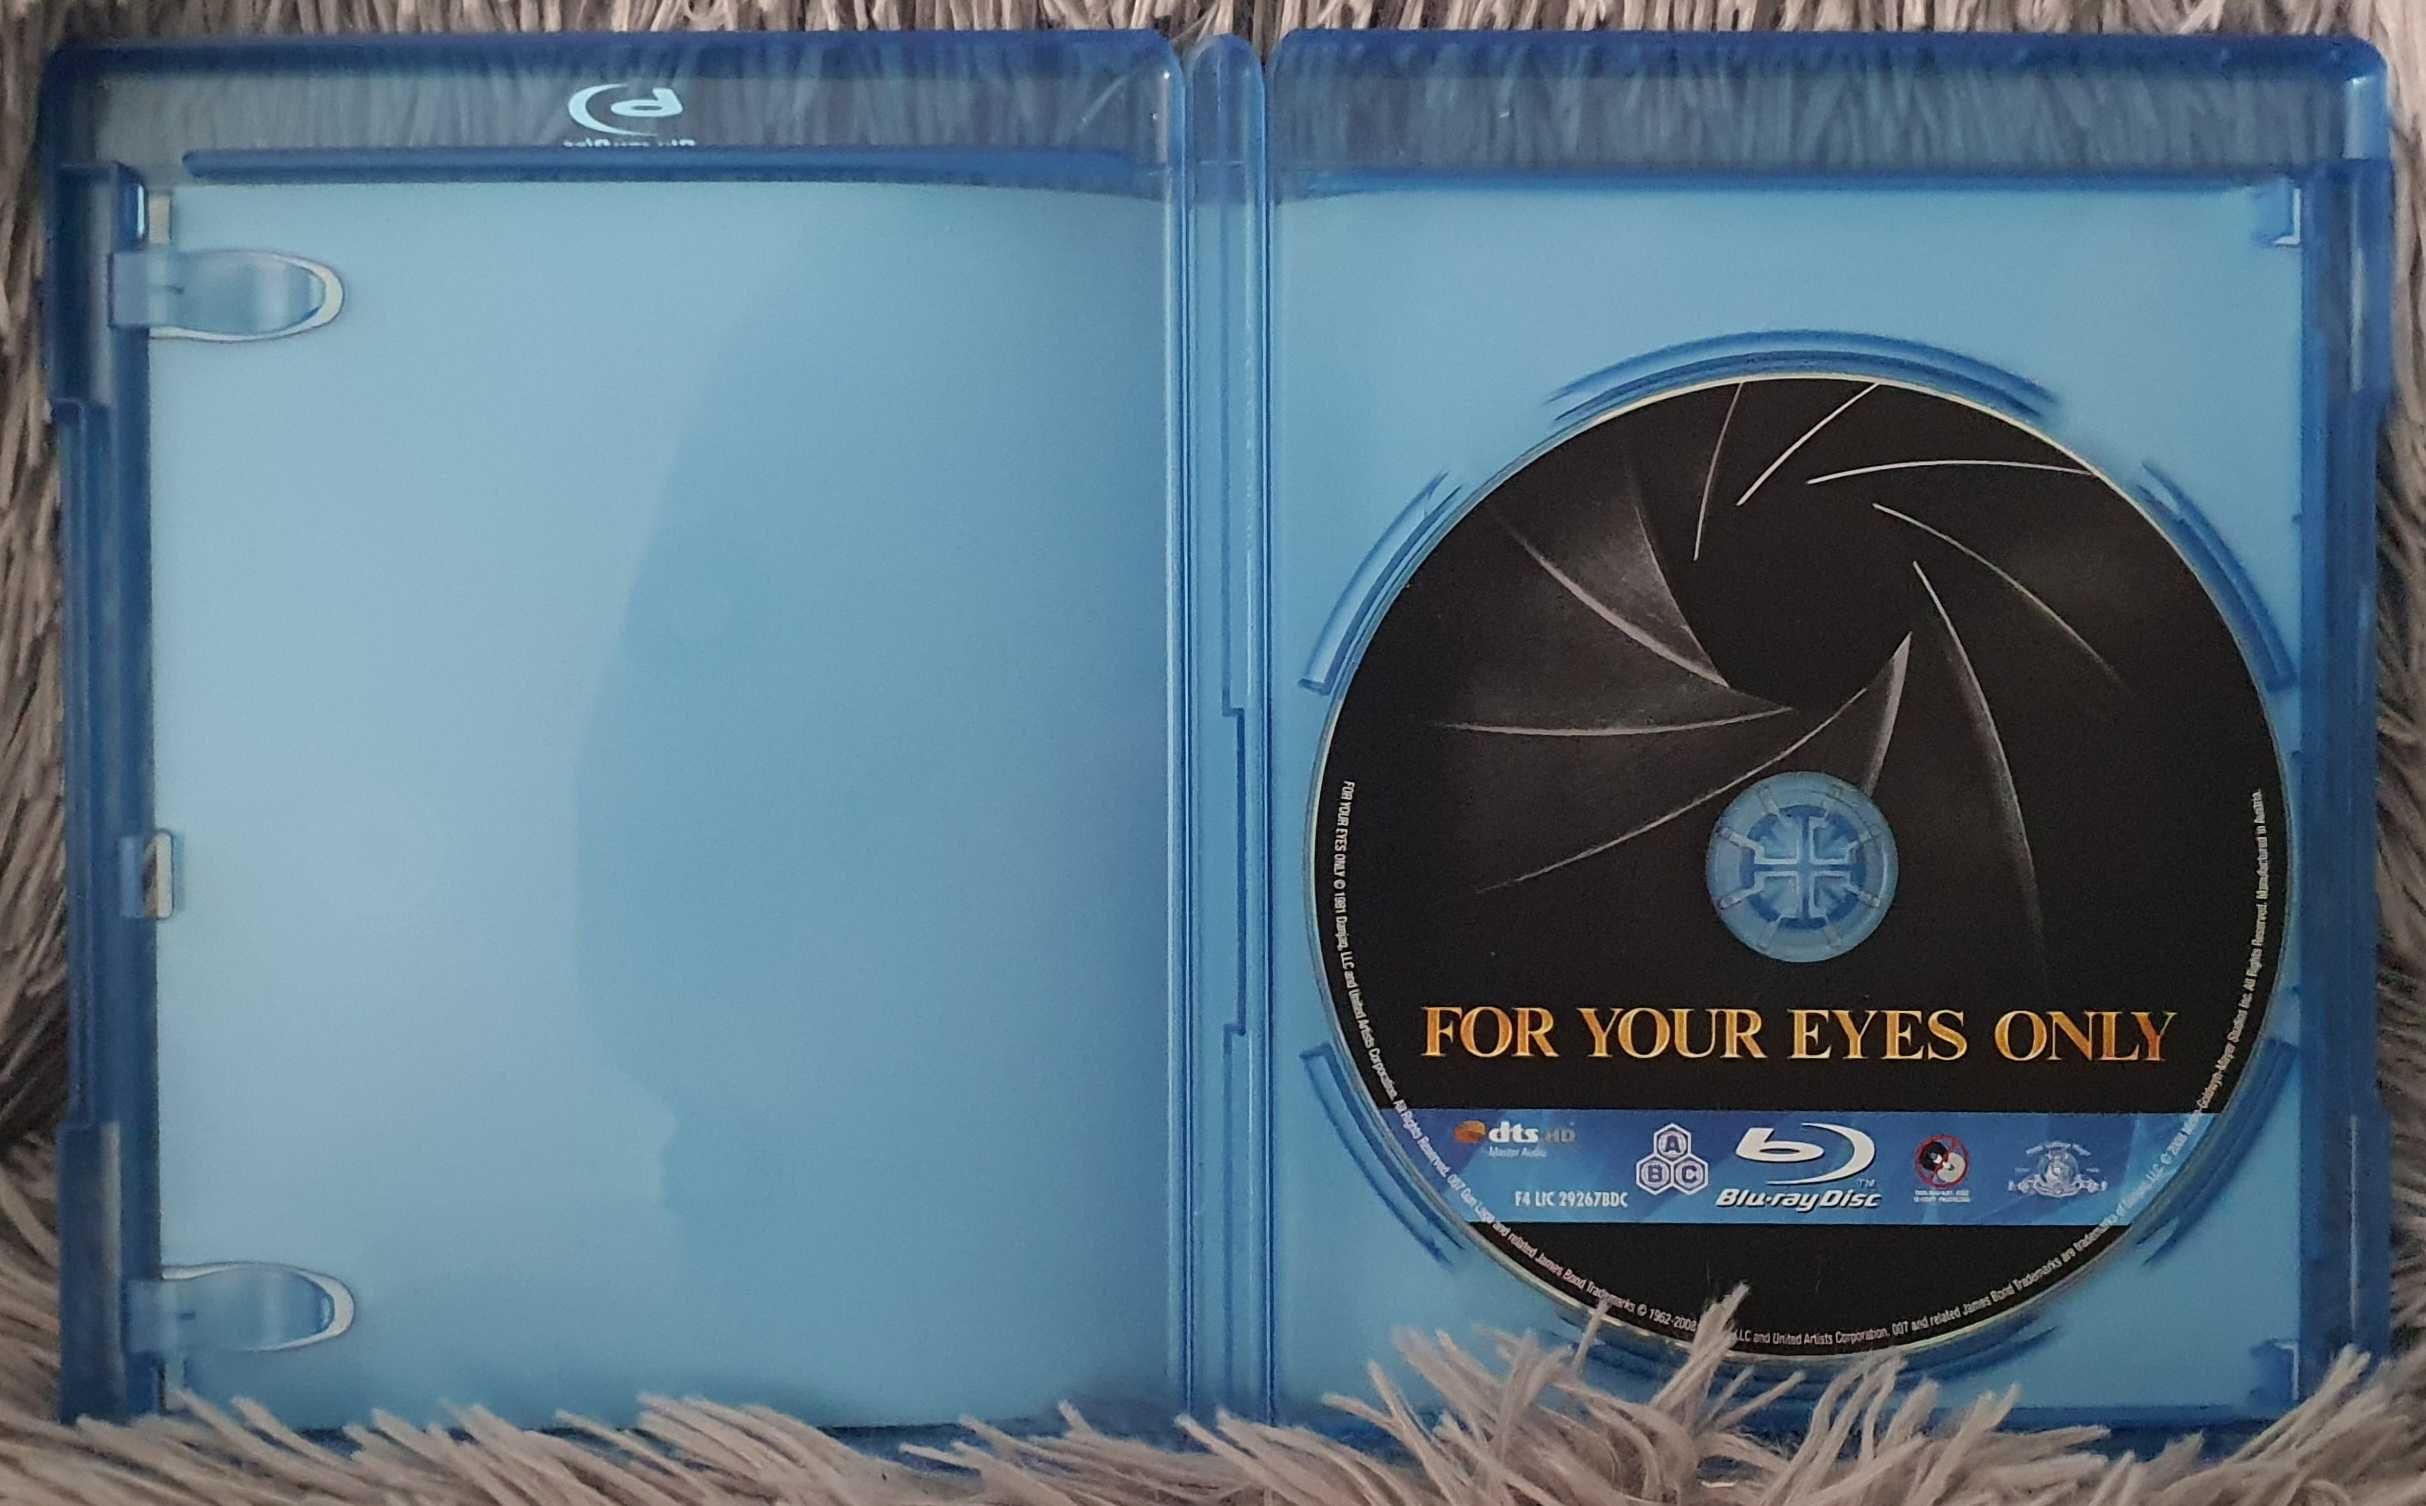 blu-ray - James Bond 007 - For Your Eyes Only (1981)